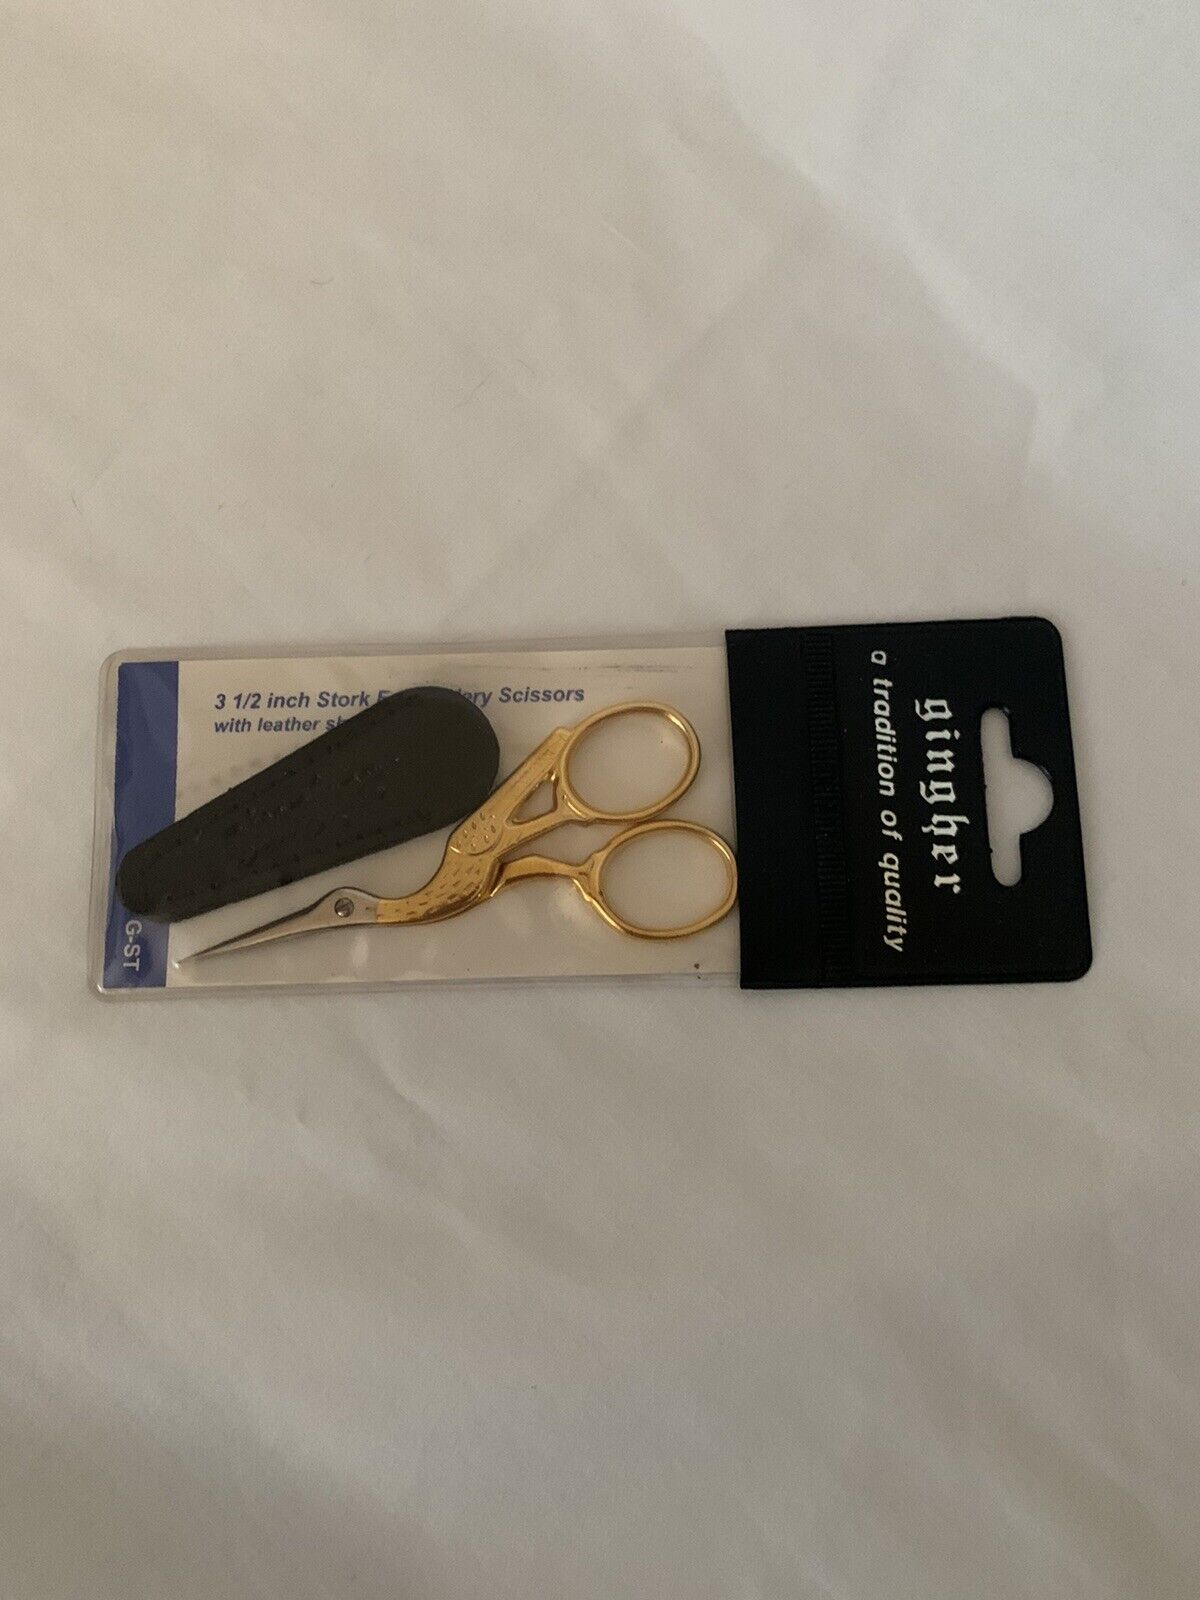 Gingher 3 1/2 Inch Gold Stork Embroidery Scissor New